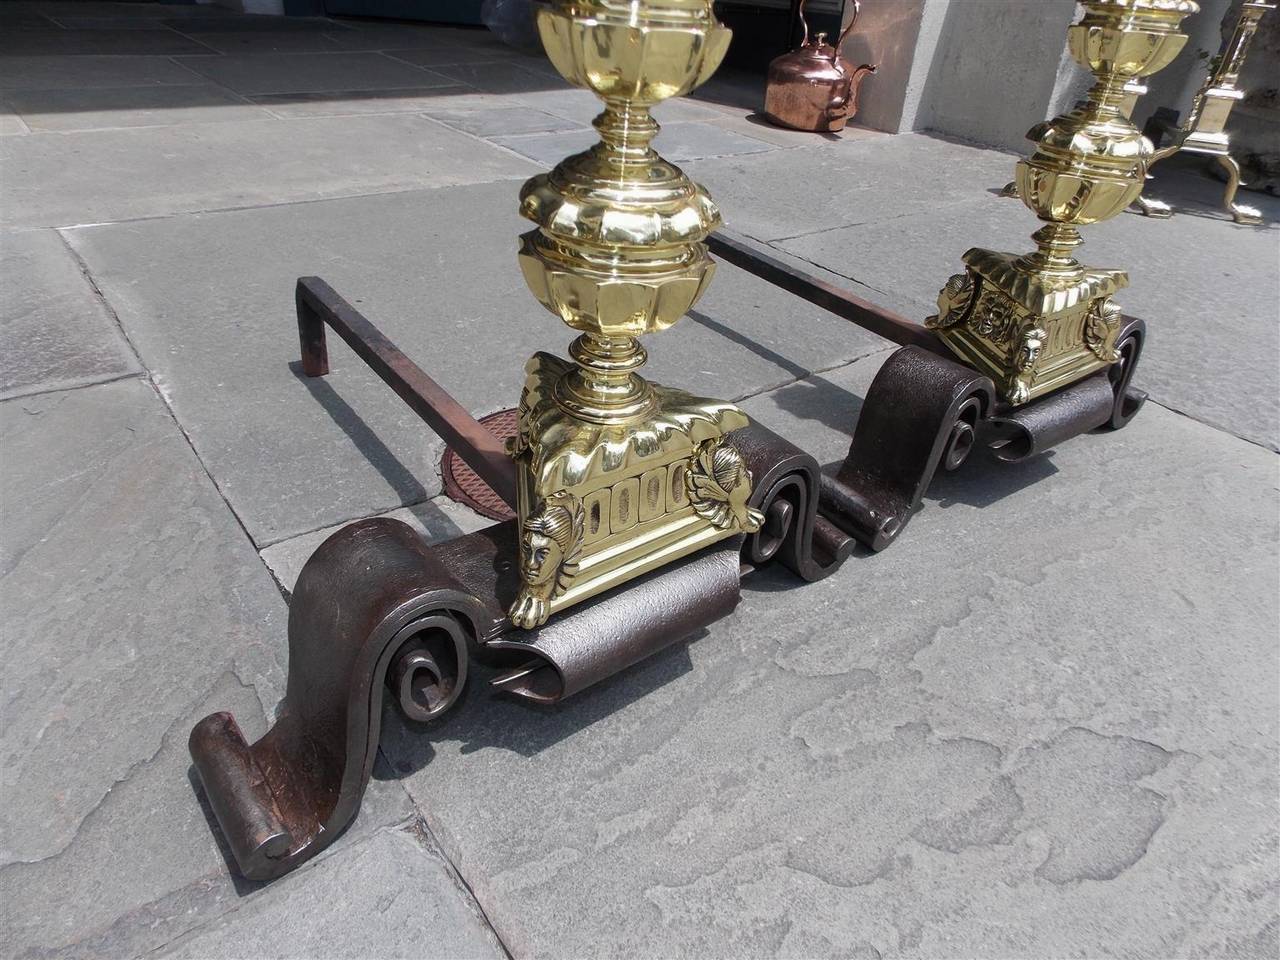 Pair of English Decorative Brass and Wrought Iron Andirons, Circa 1750 For Sale 2